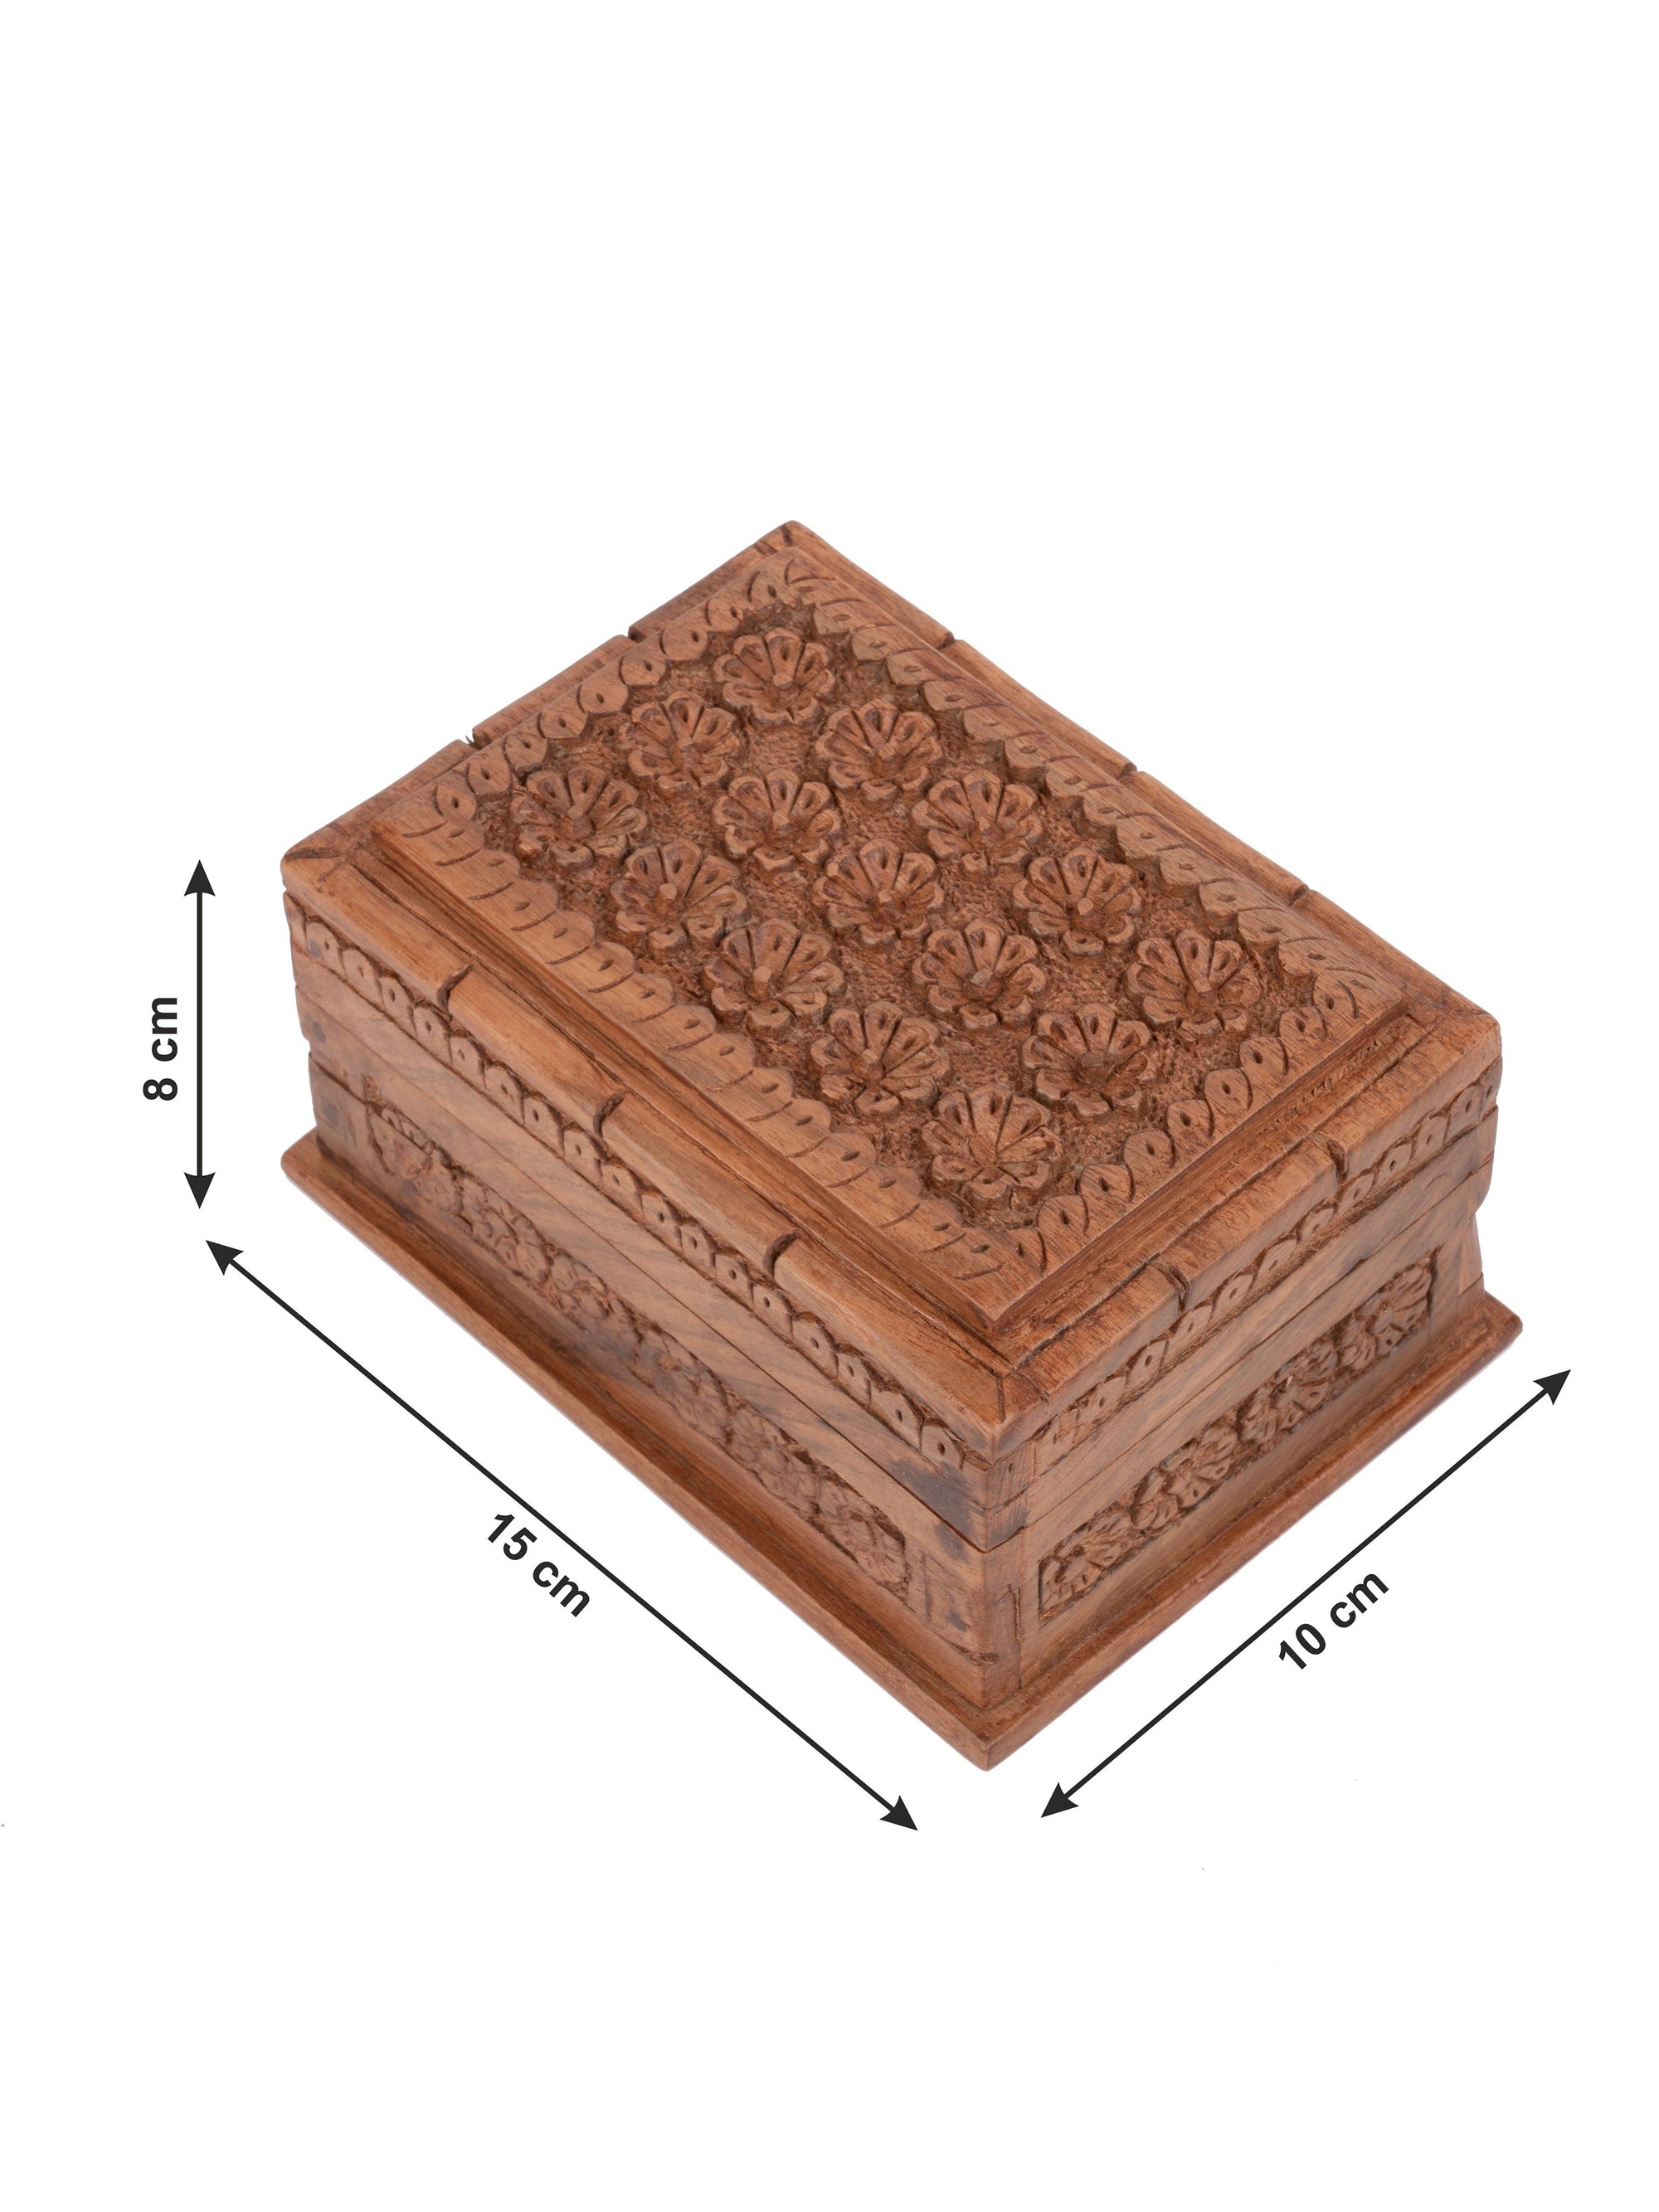 Walnut wood Rectangle Jewellery box with floral motif carving on top - 6x4 inches - The Heritage Artifacts